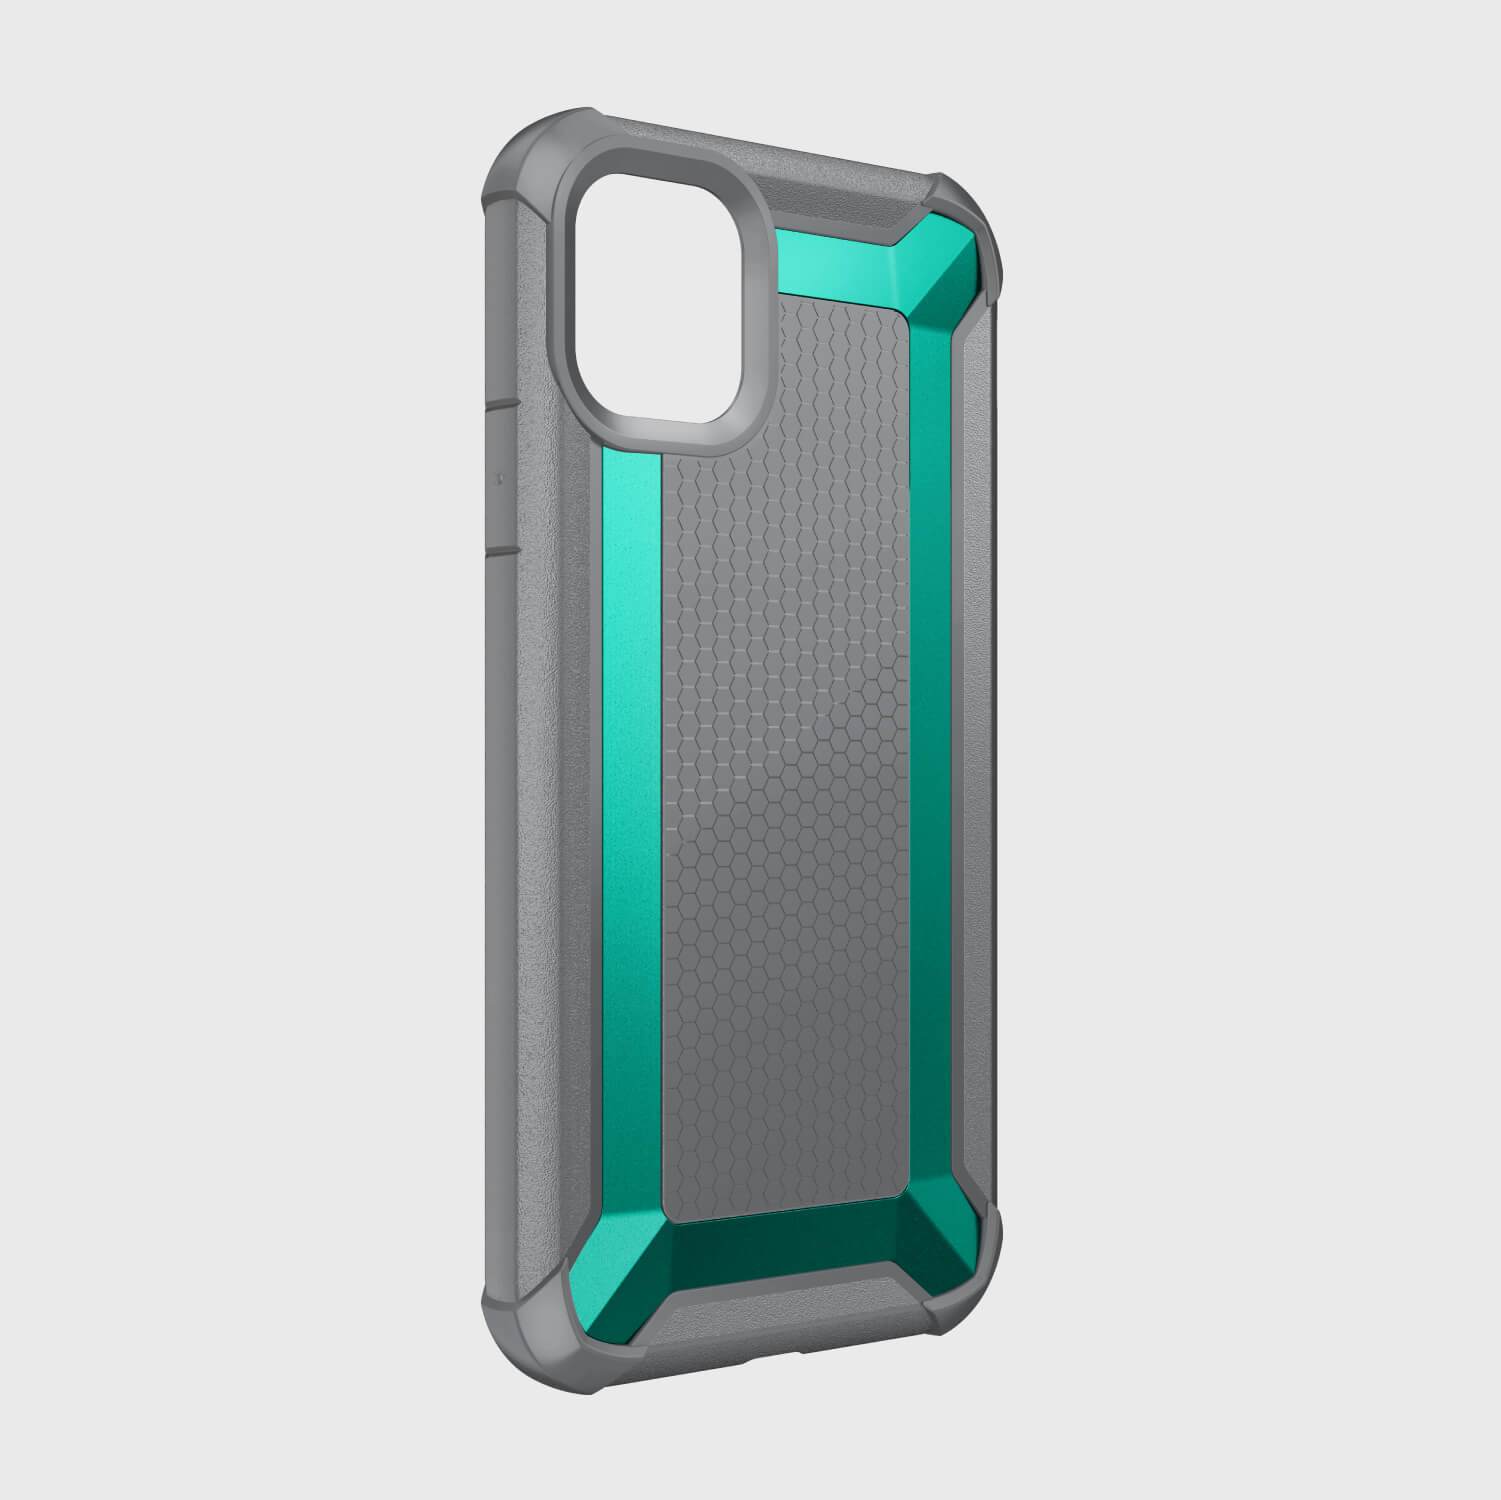 The Raptic iPhone 11 Pro Case - TACTICAL in grey and teal.